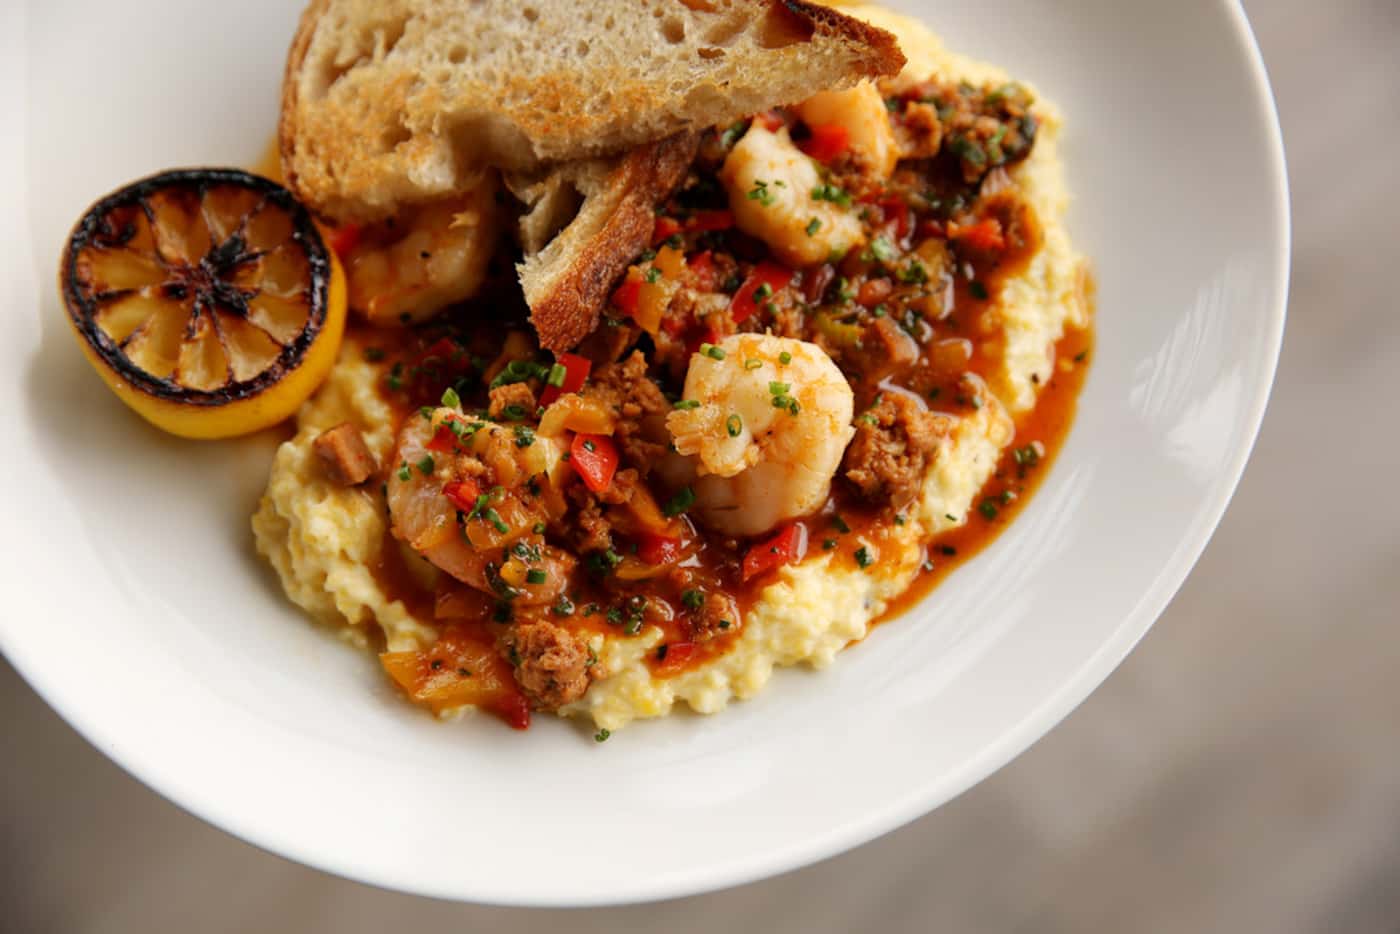 Low Country shrimp and grits served inside Tupelo Honey restaurant in Frisco, Texas Tuesday...